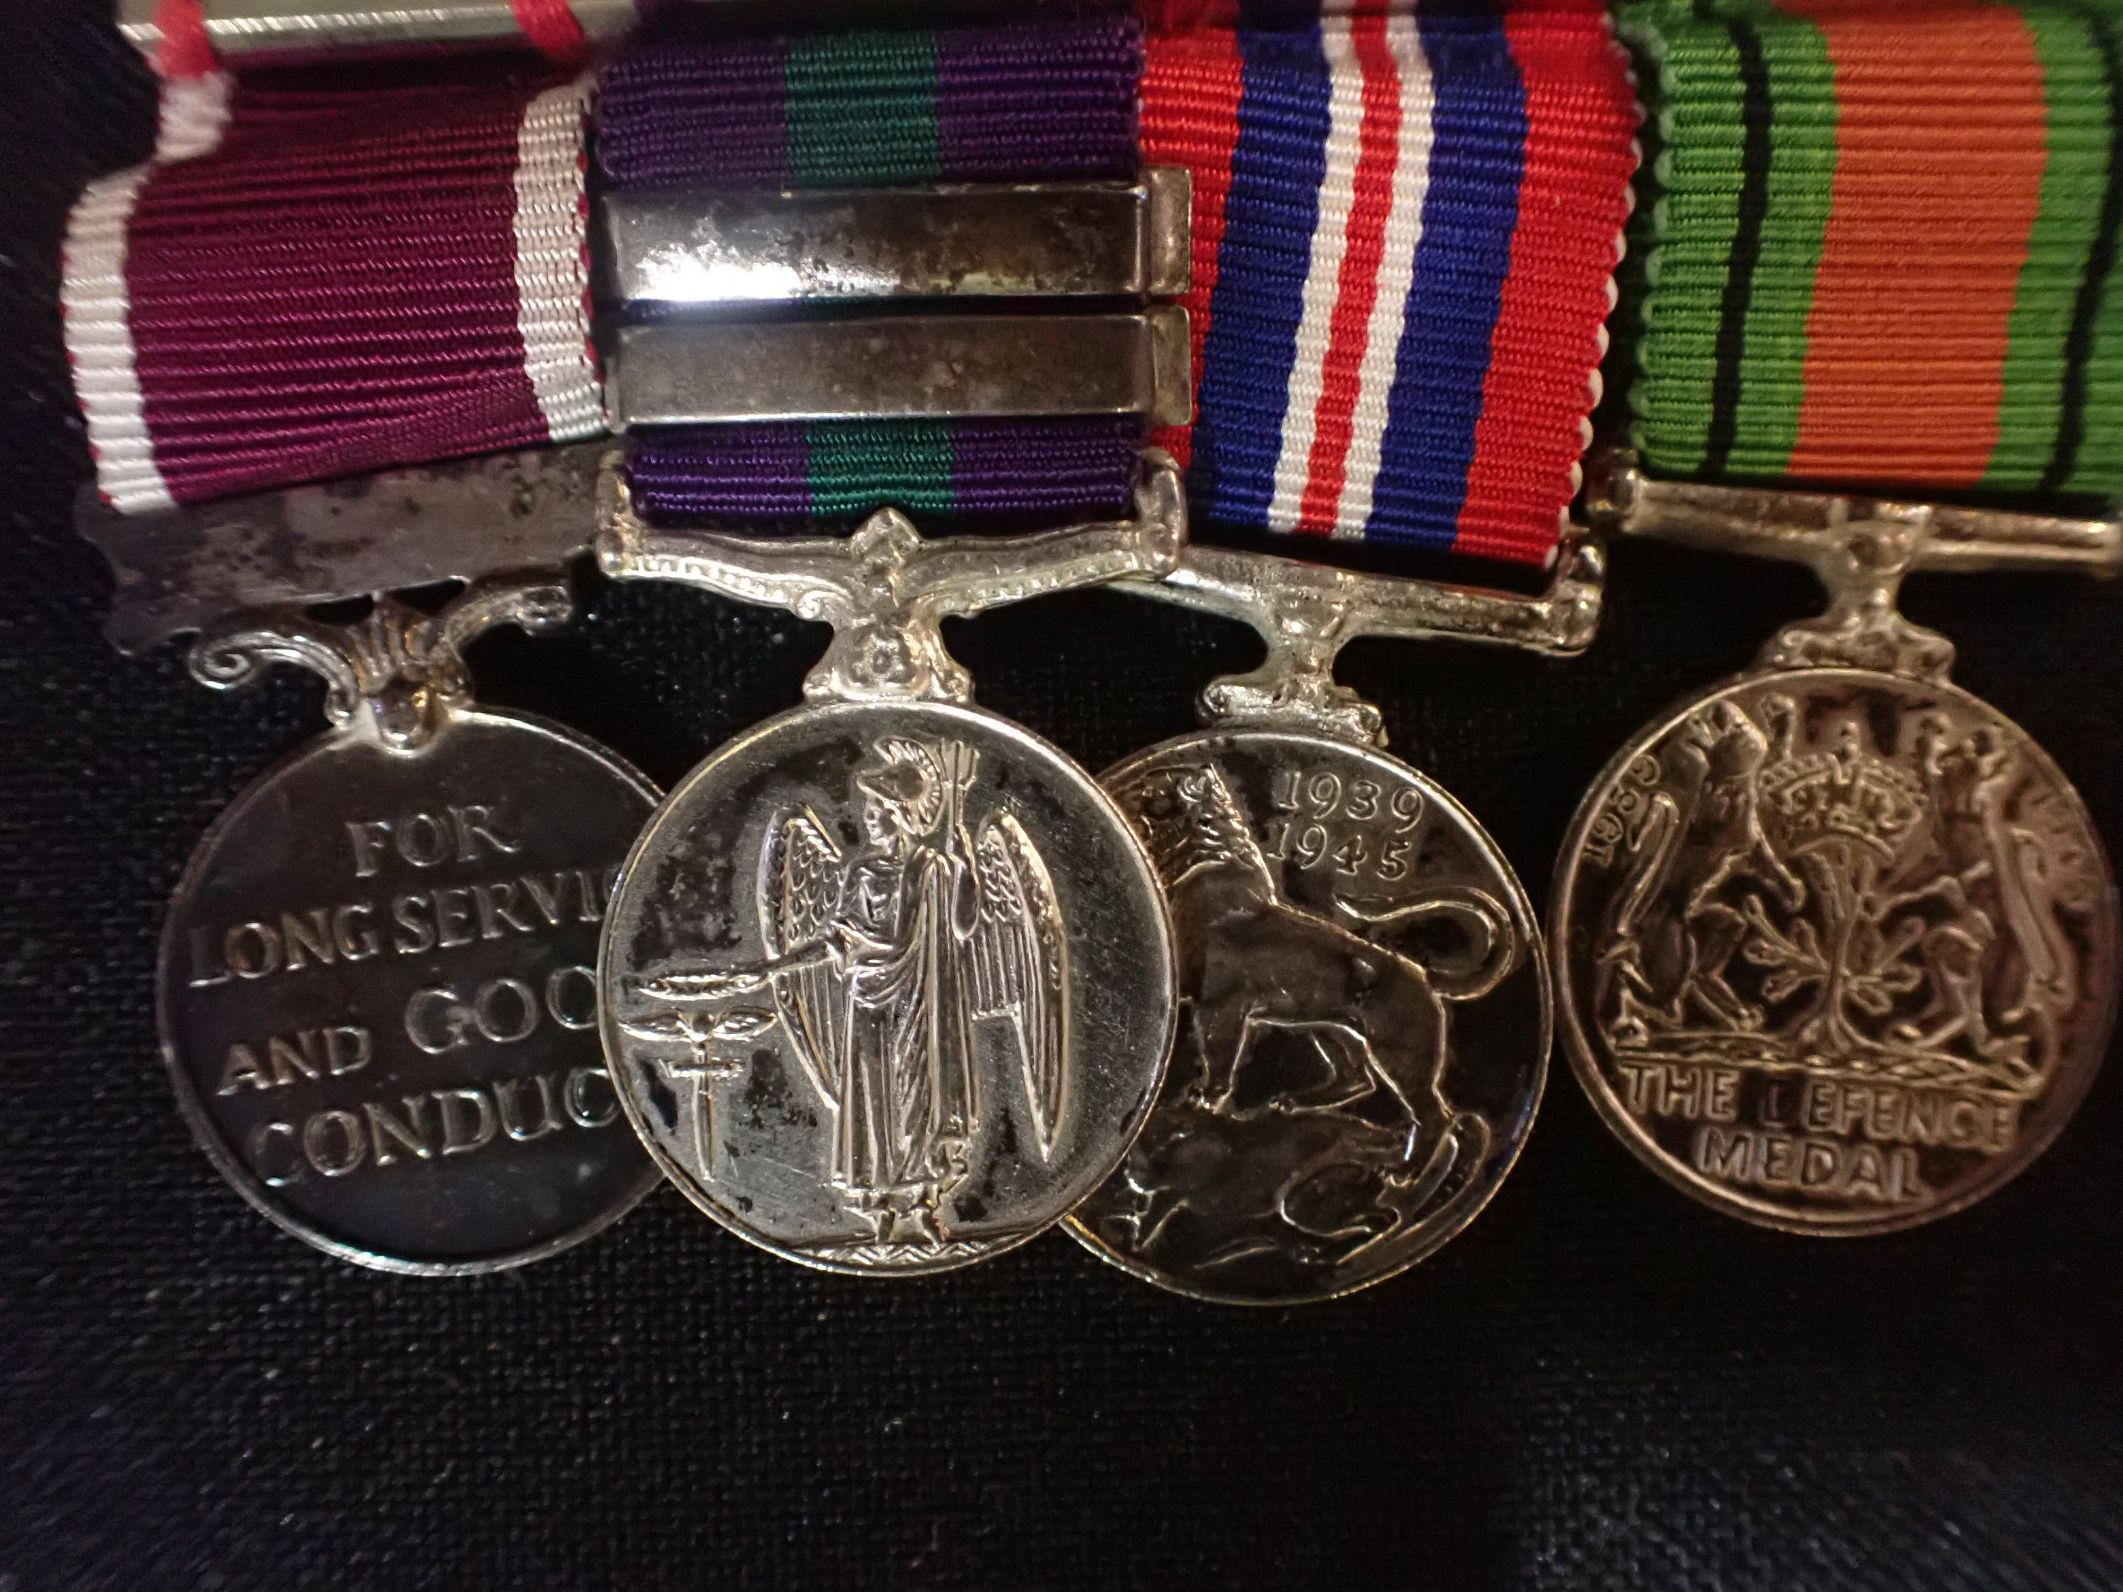 A GROUP OF FOUR WWII MINIATURE DRESS MEDALS - Image 2 of 3